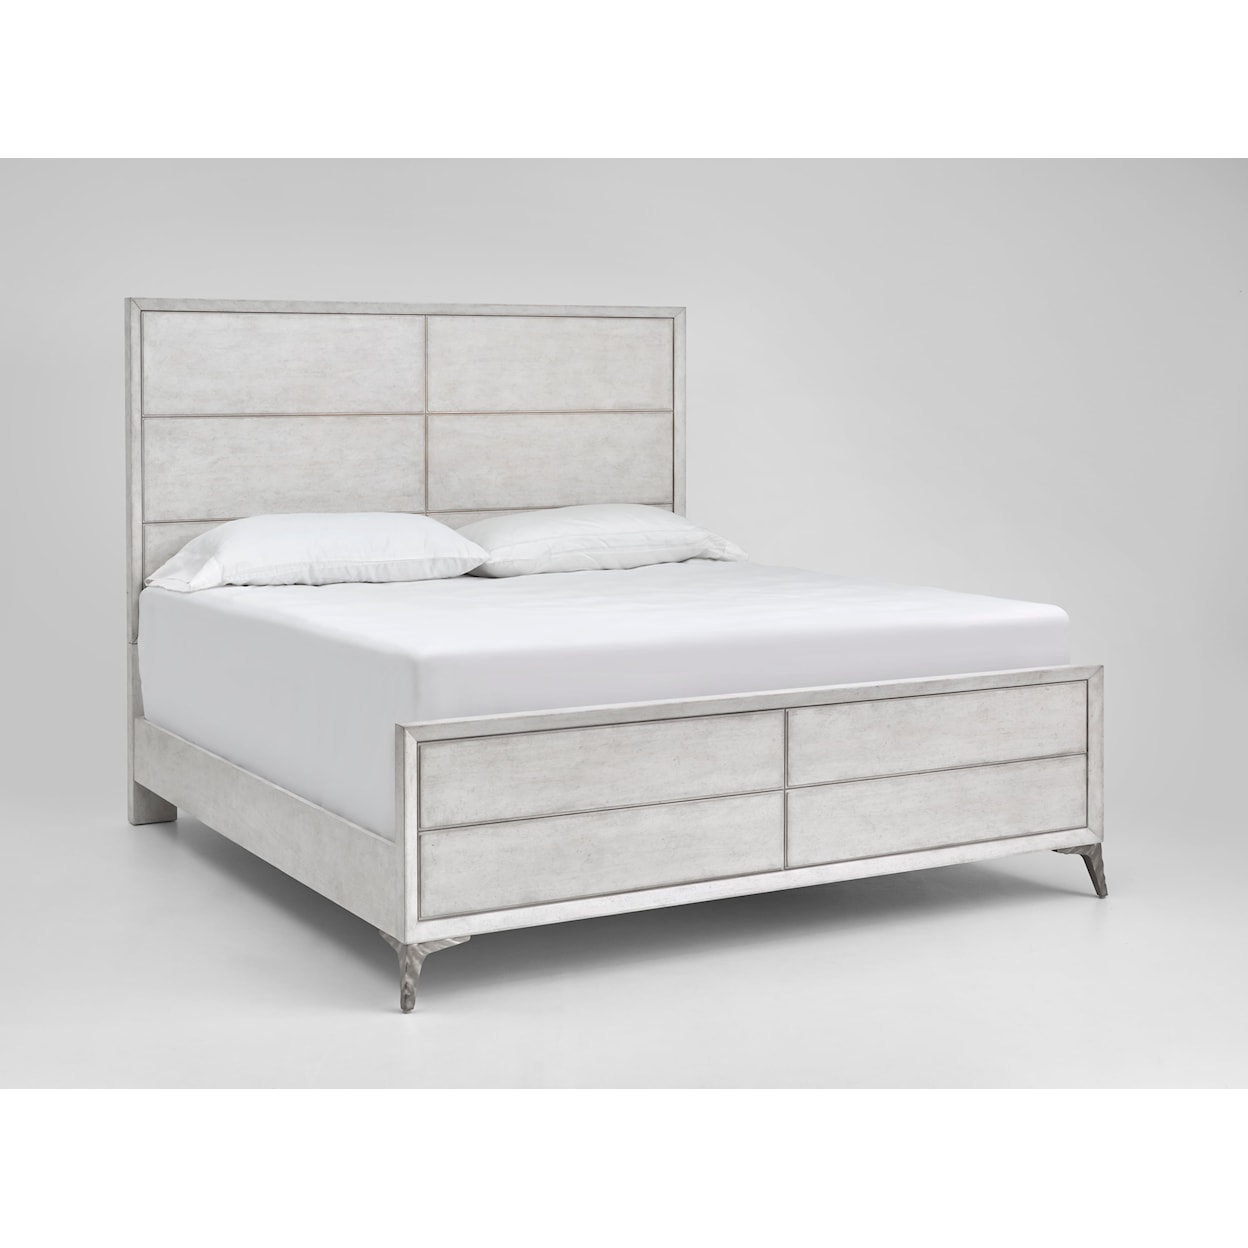 The Preserve Whittier Queen Panel Bed